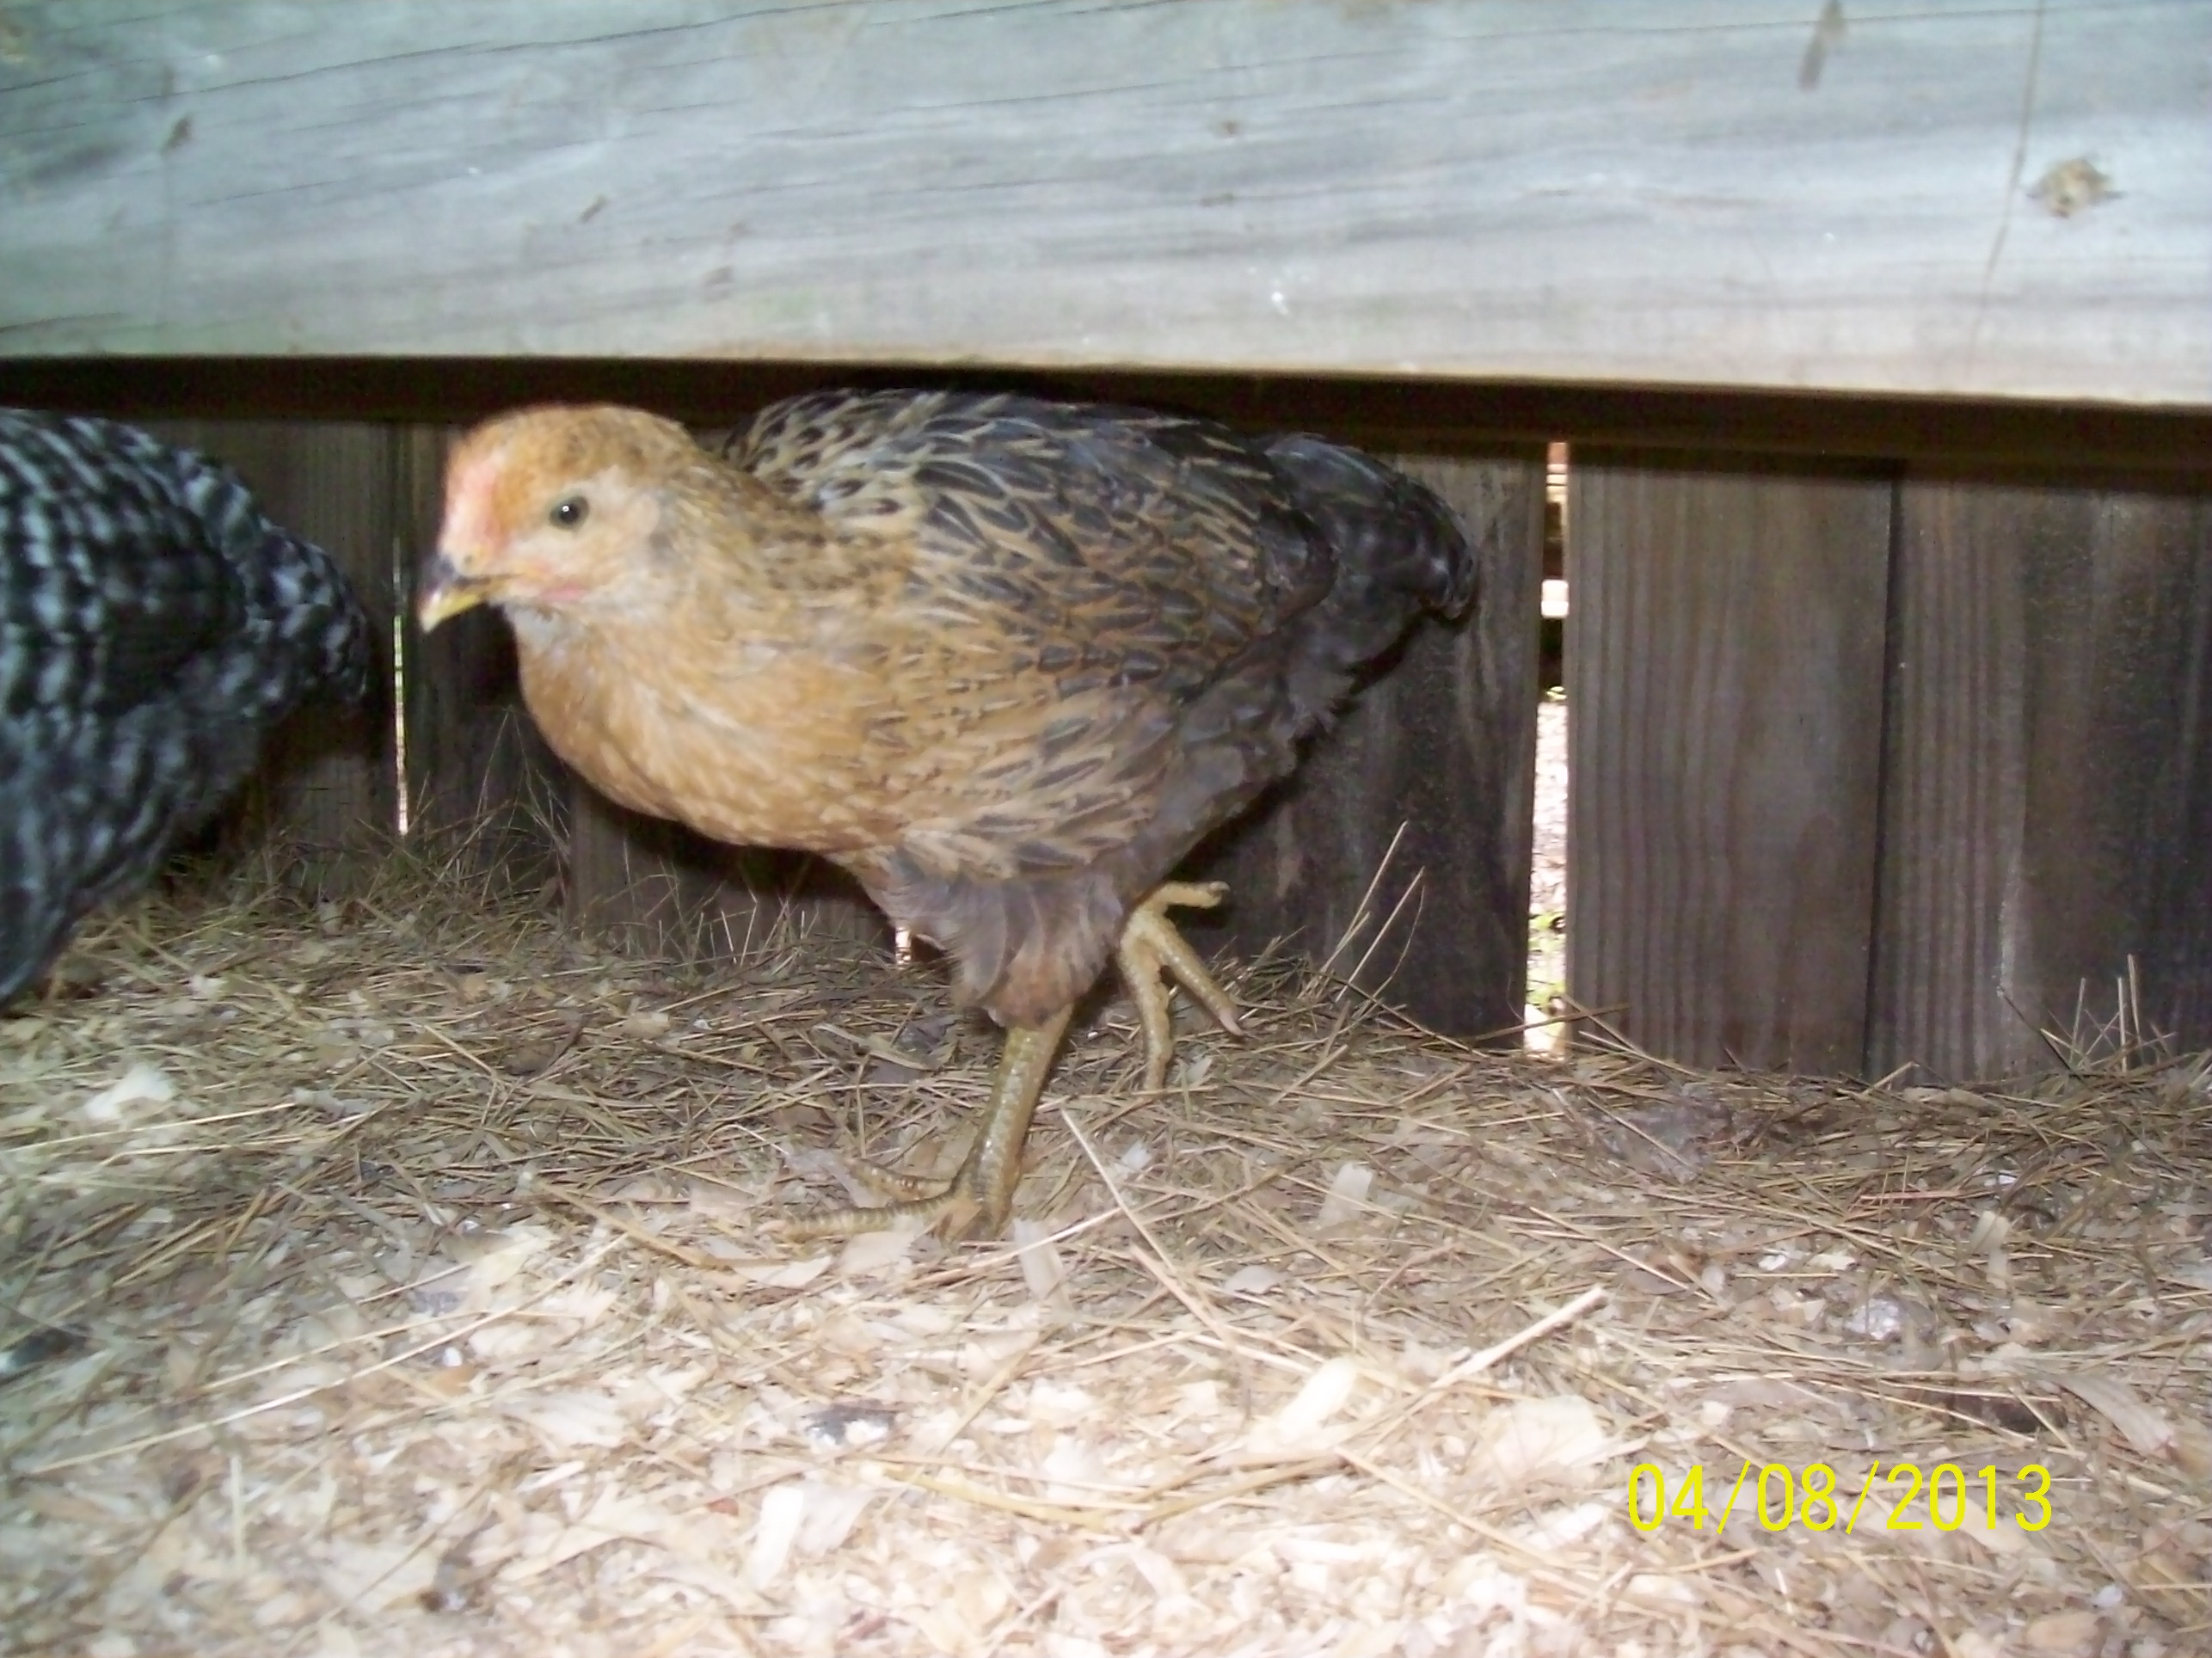 Mr. Tutsie popping out from under the bench in the coop.